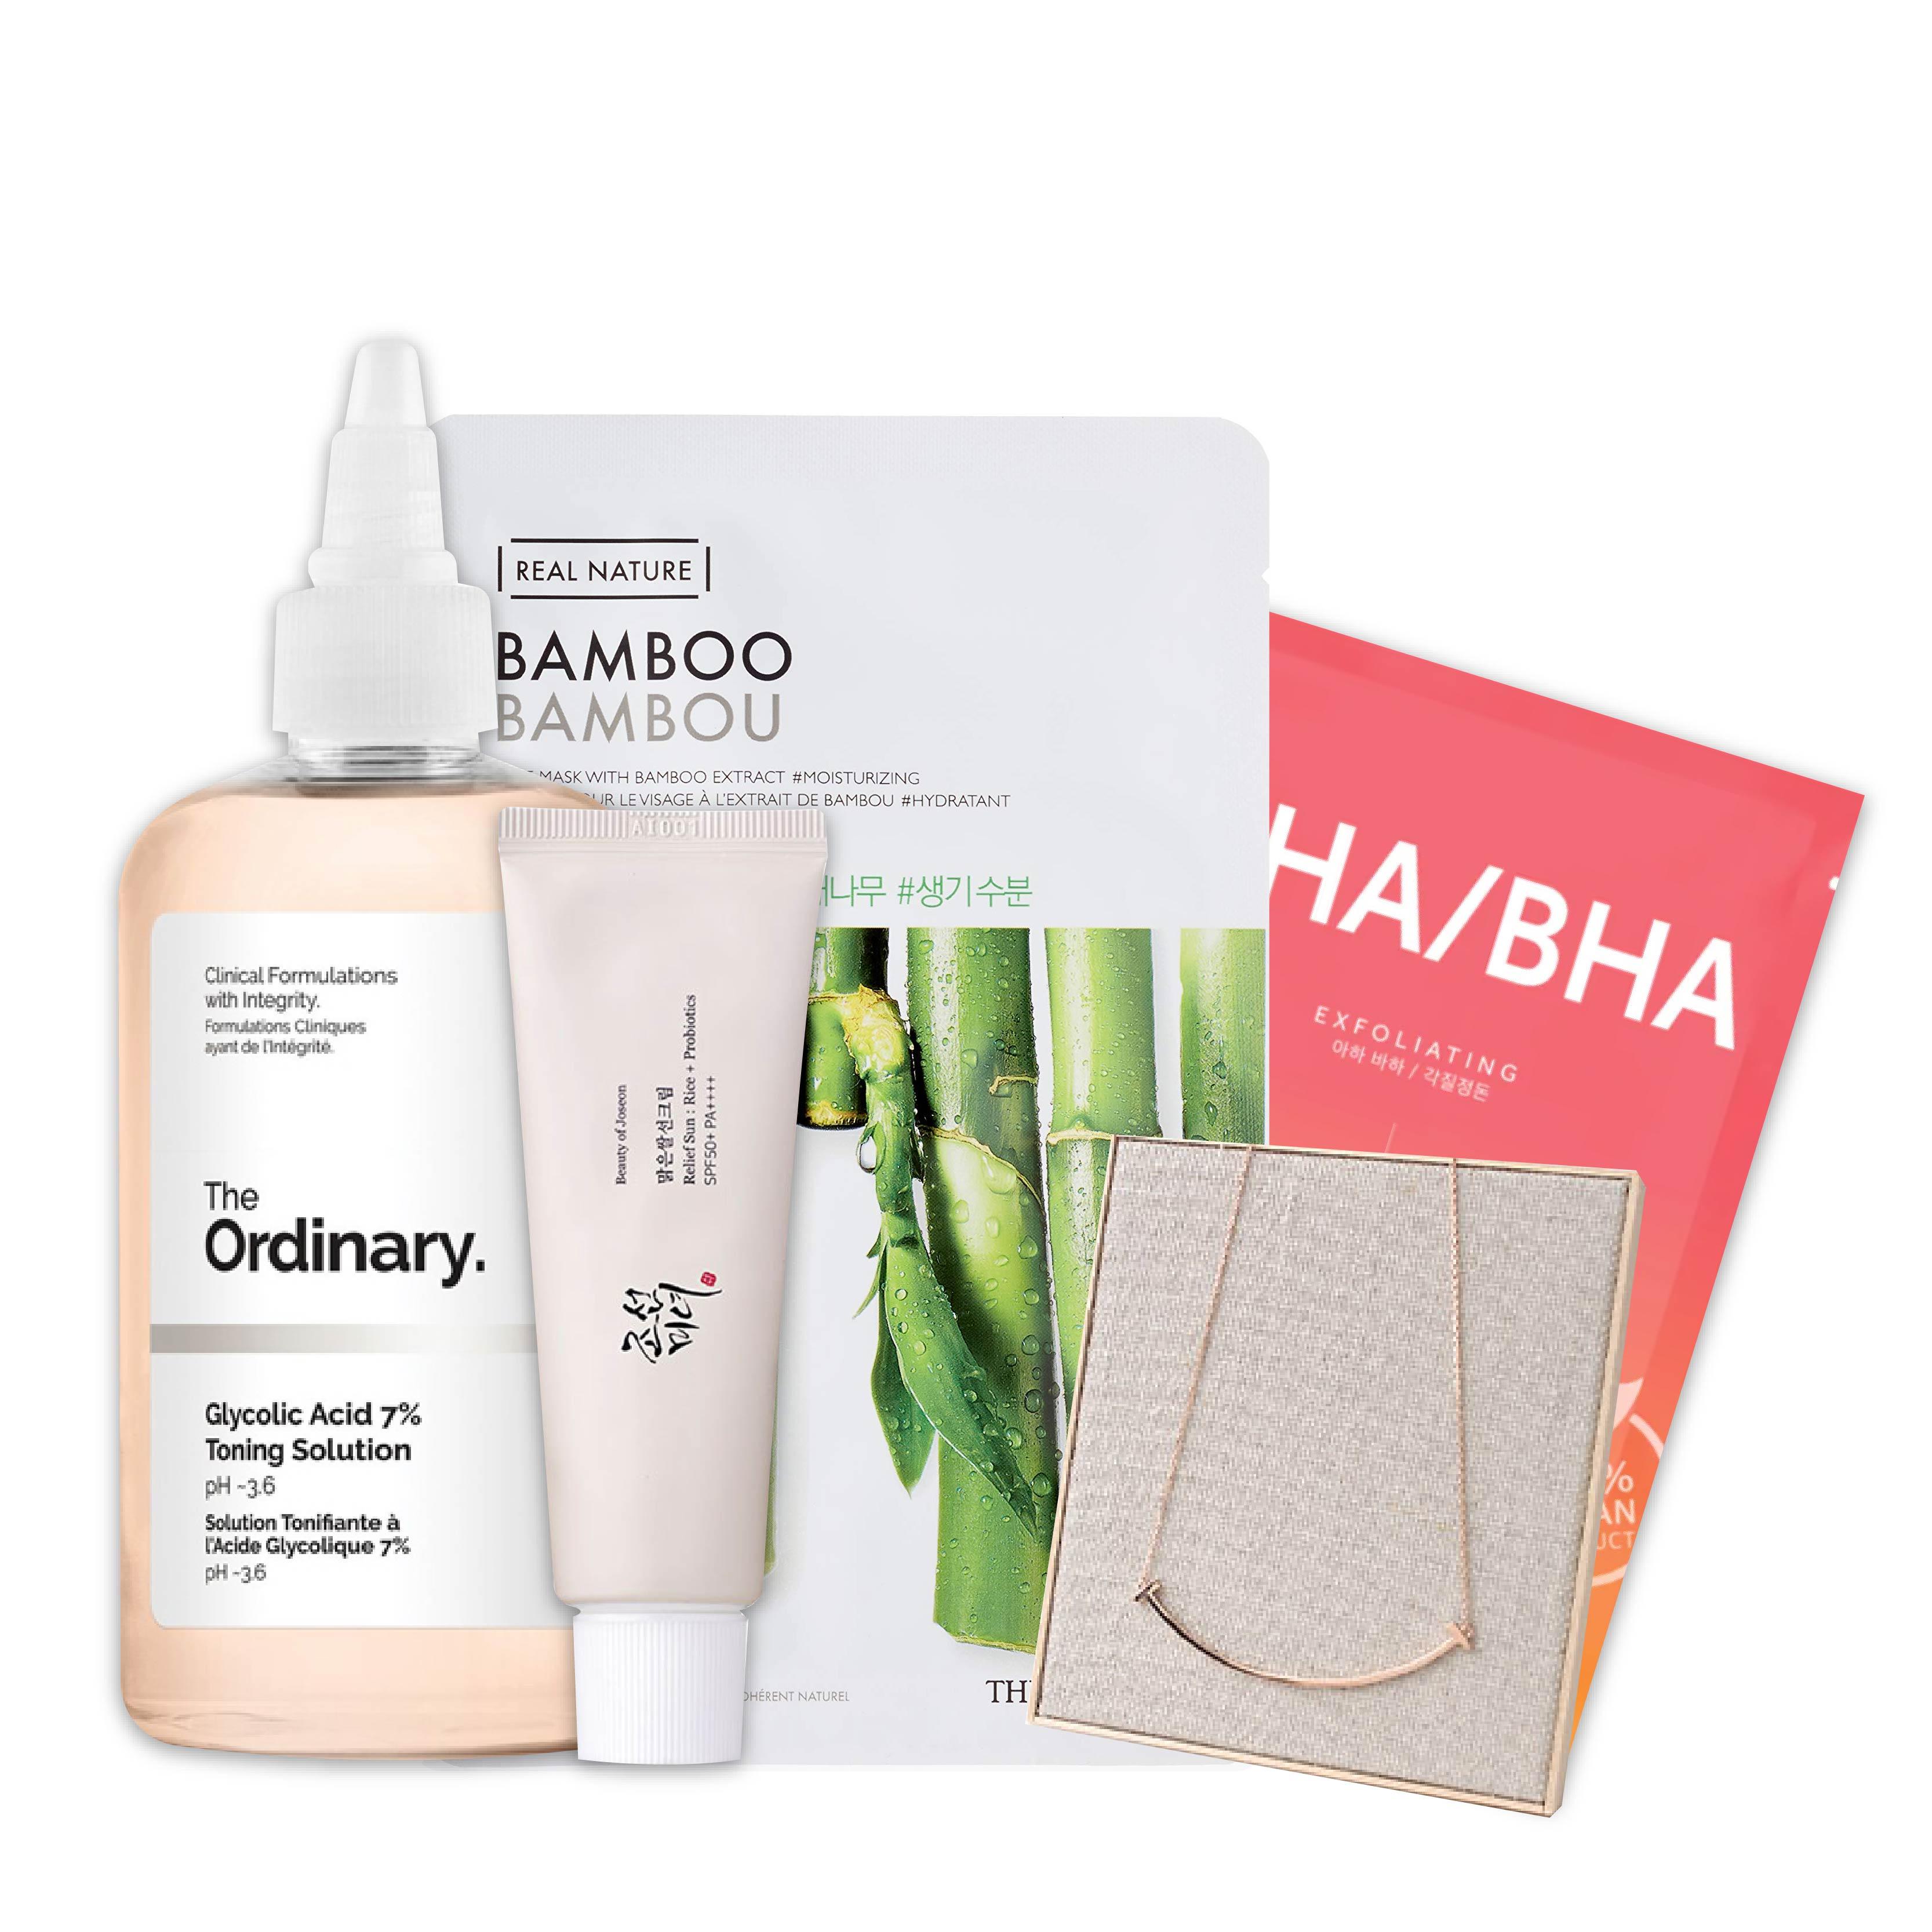 Gift Bundle #24 [Glycolic Acid 7% Toning Solution, Relief Sun: Rice + Probiotics SPF50+ PA++++, Real Nature Bamboo Face Mask, The Clean Vegan Mask - AHA/BHA, 92.5 Silver N-Label Necklace]